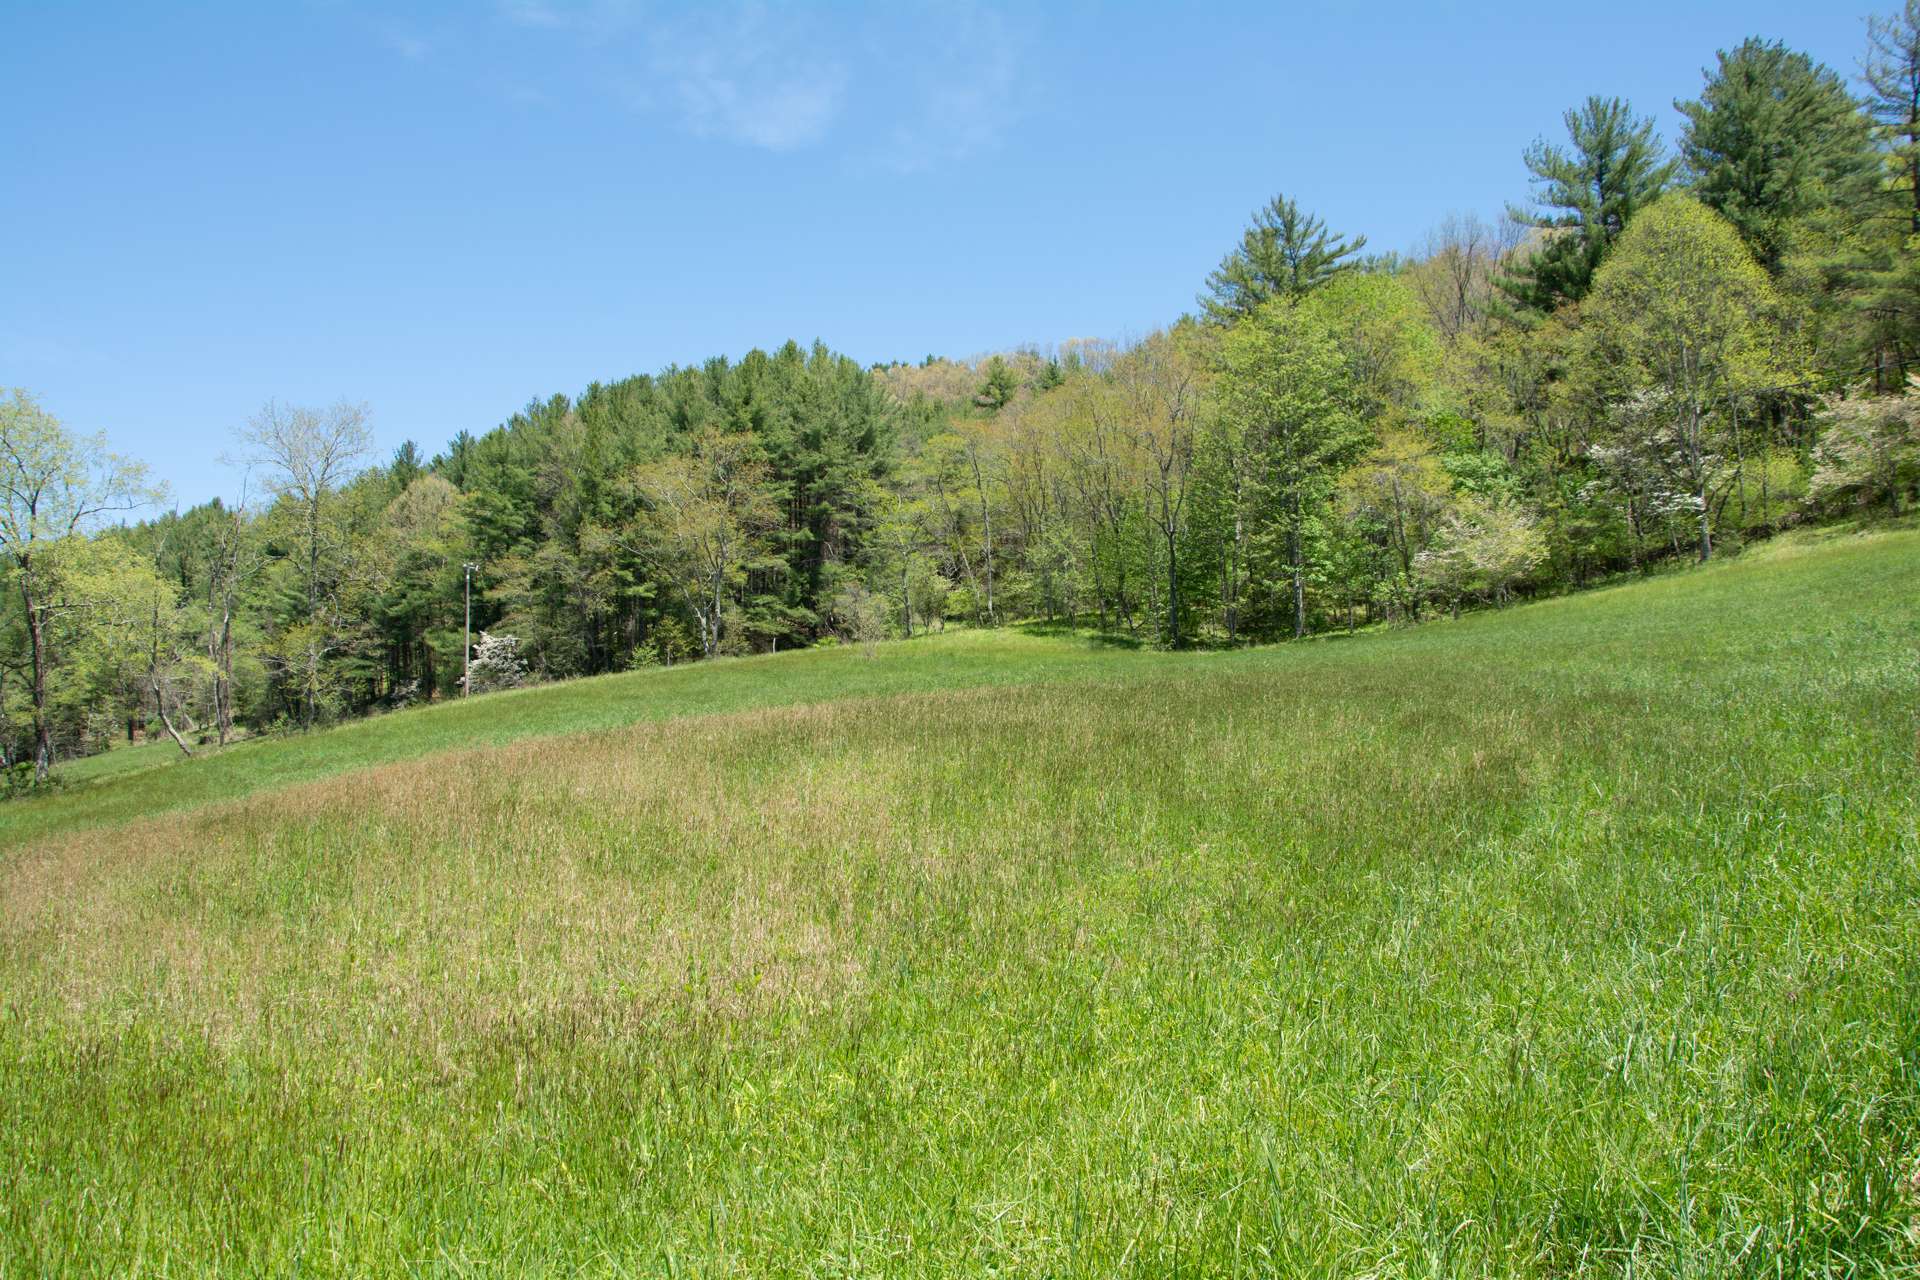 The hill behind the homesite is wooded and home to wildlife that includes whitetail deer and wild turkey.